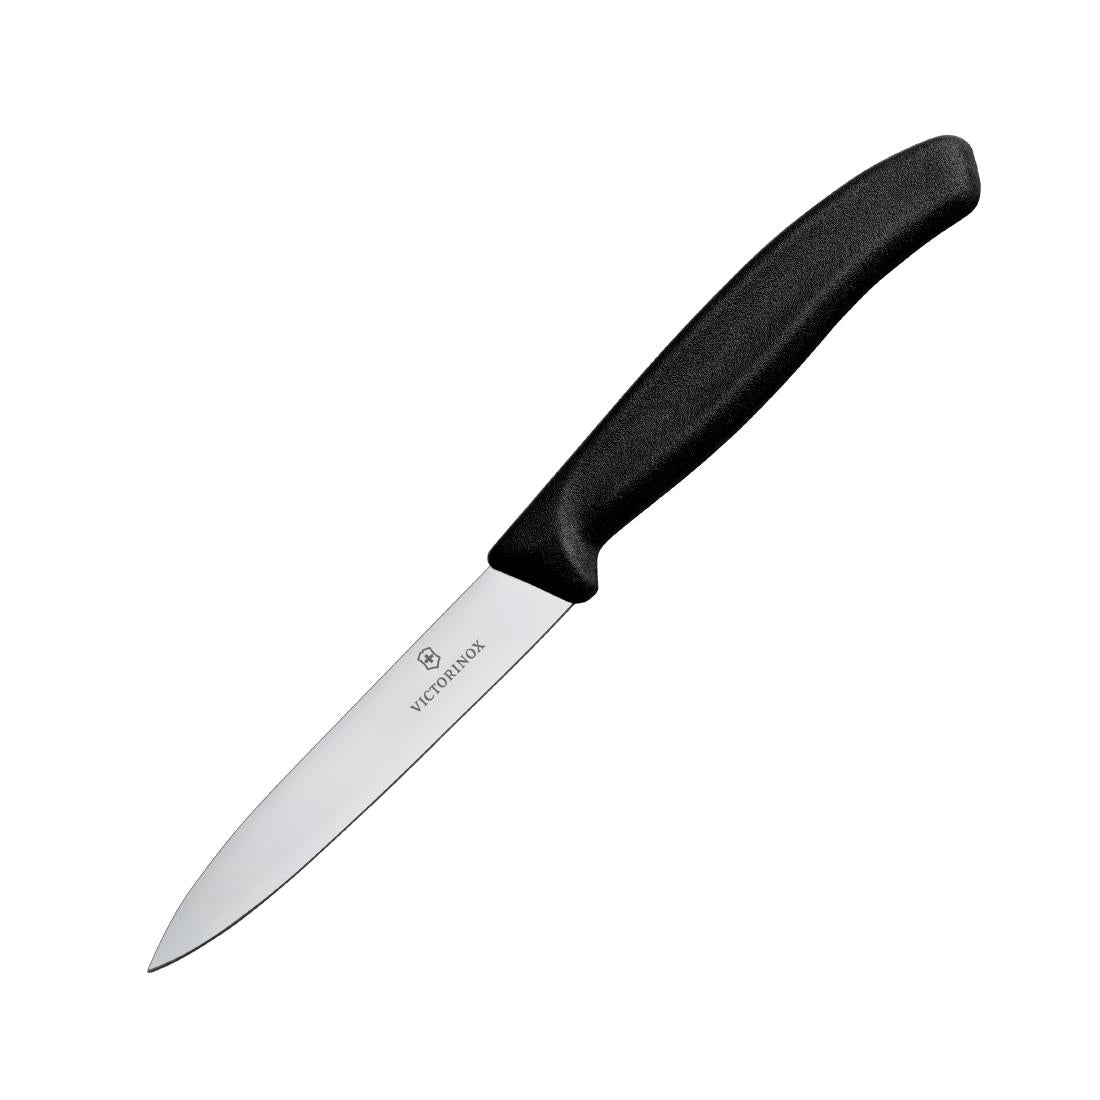 CX743 Victorinox Paring Knife Pointed Tip 10cm Black JD Catering Equipment Solutions Ltd